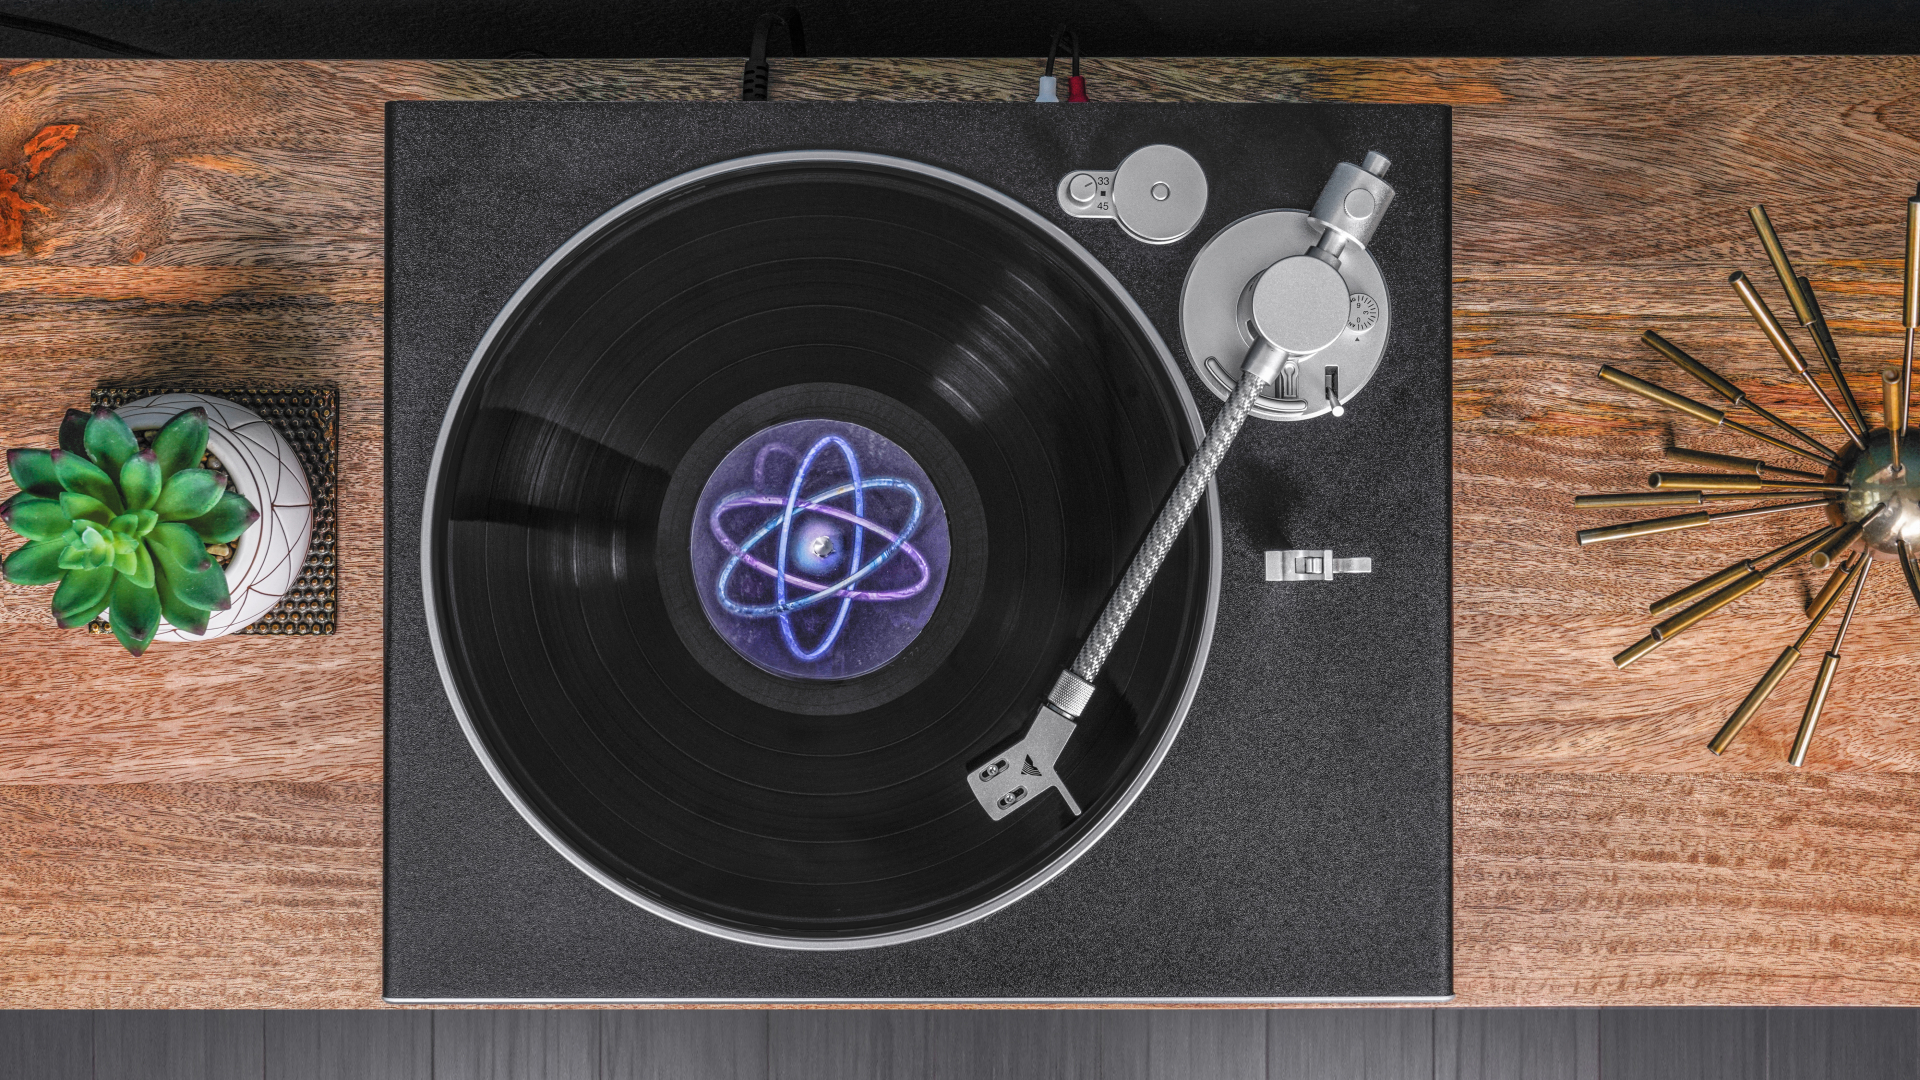 Victrola Hi-Res Carbon turntable from above, on a hi-fi stand, playing a vinyl record